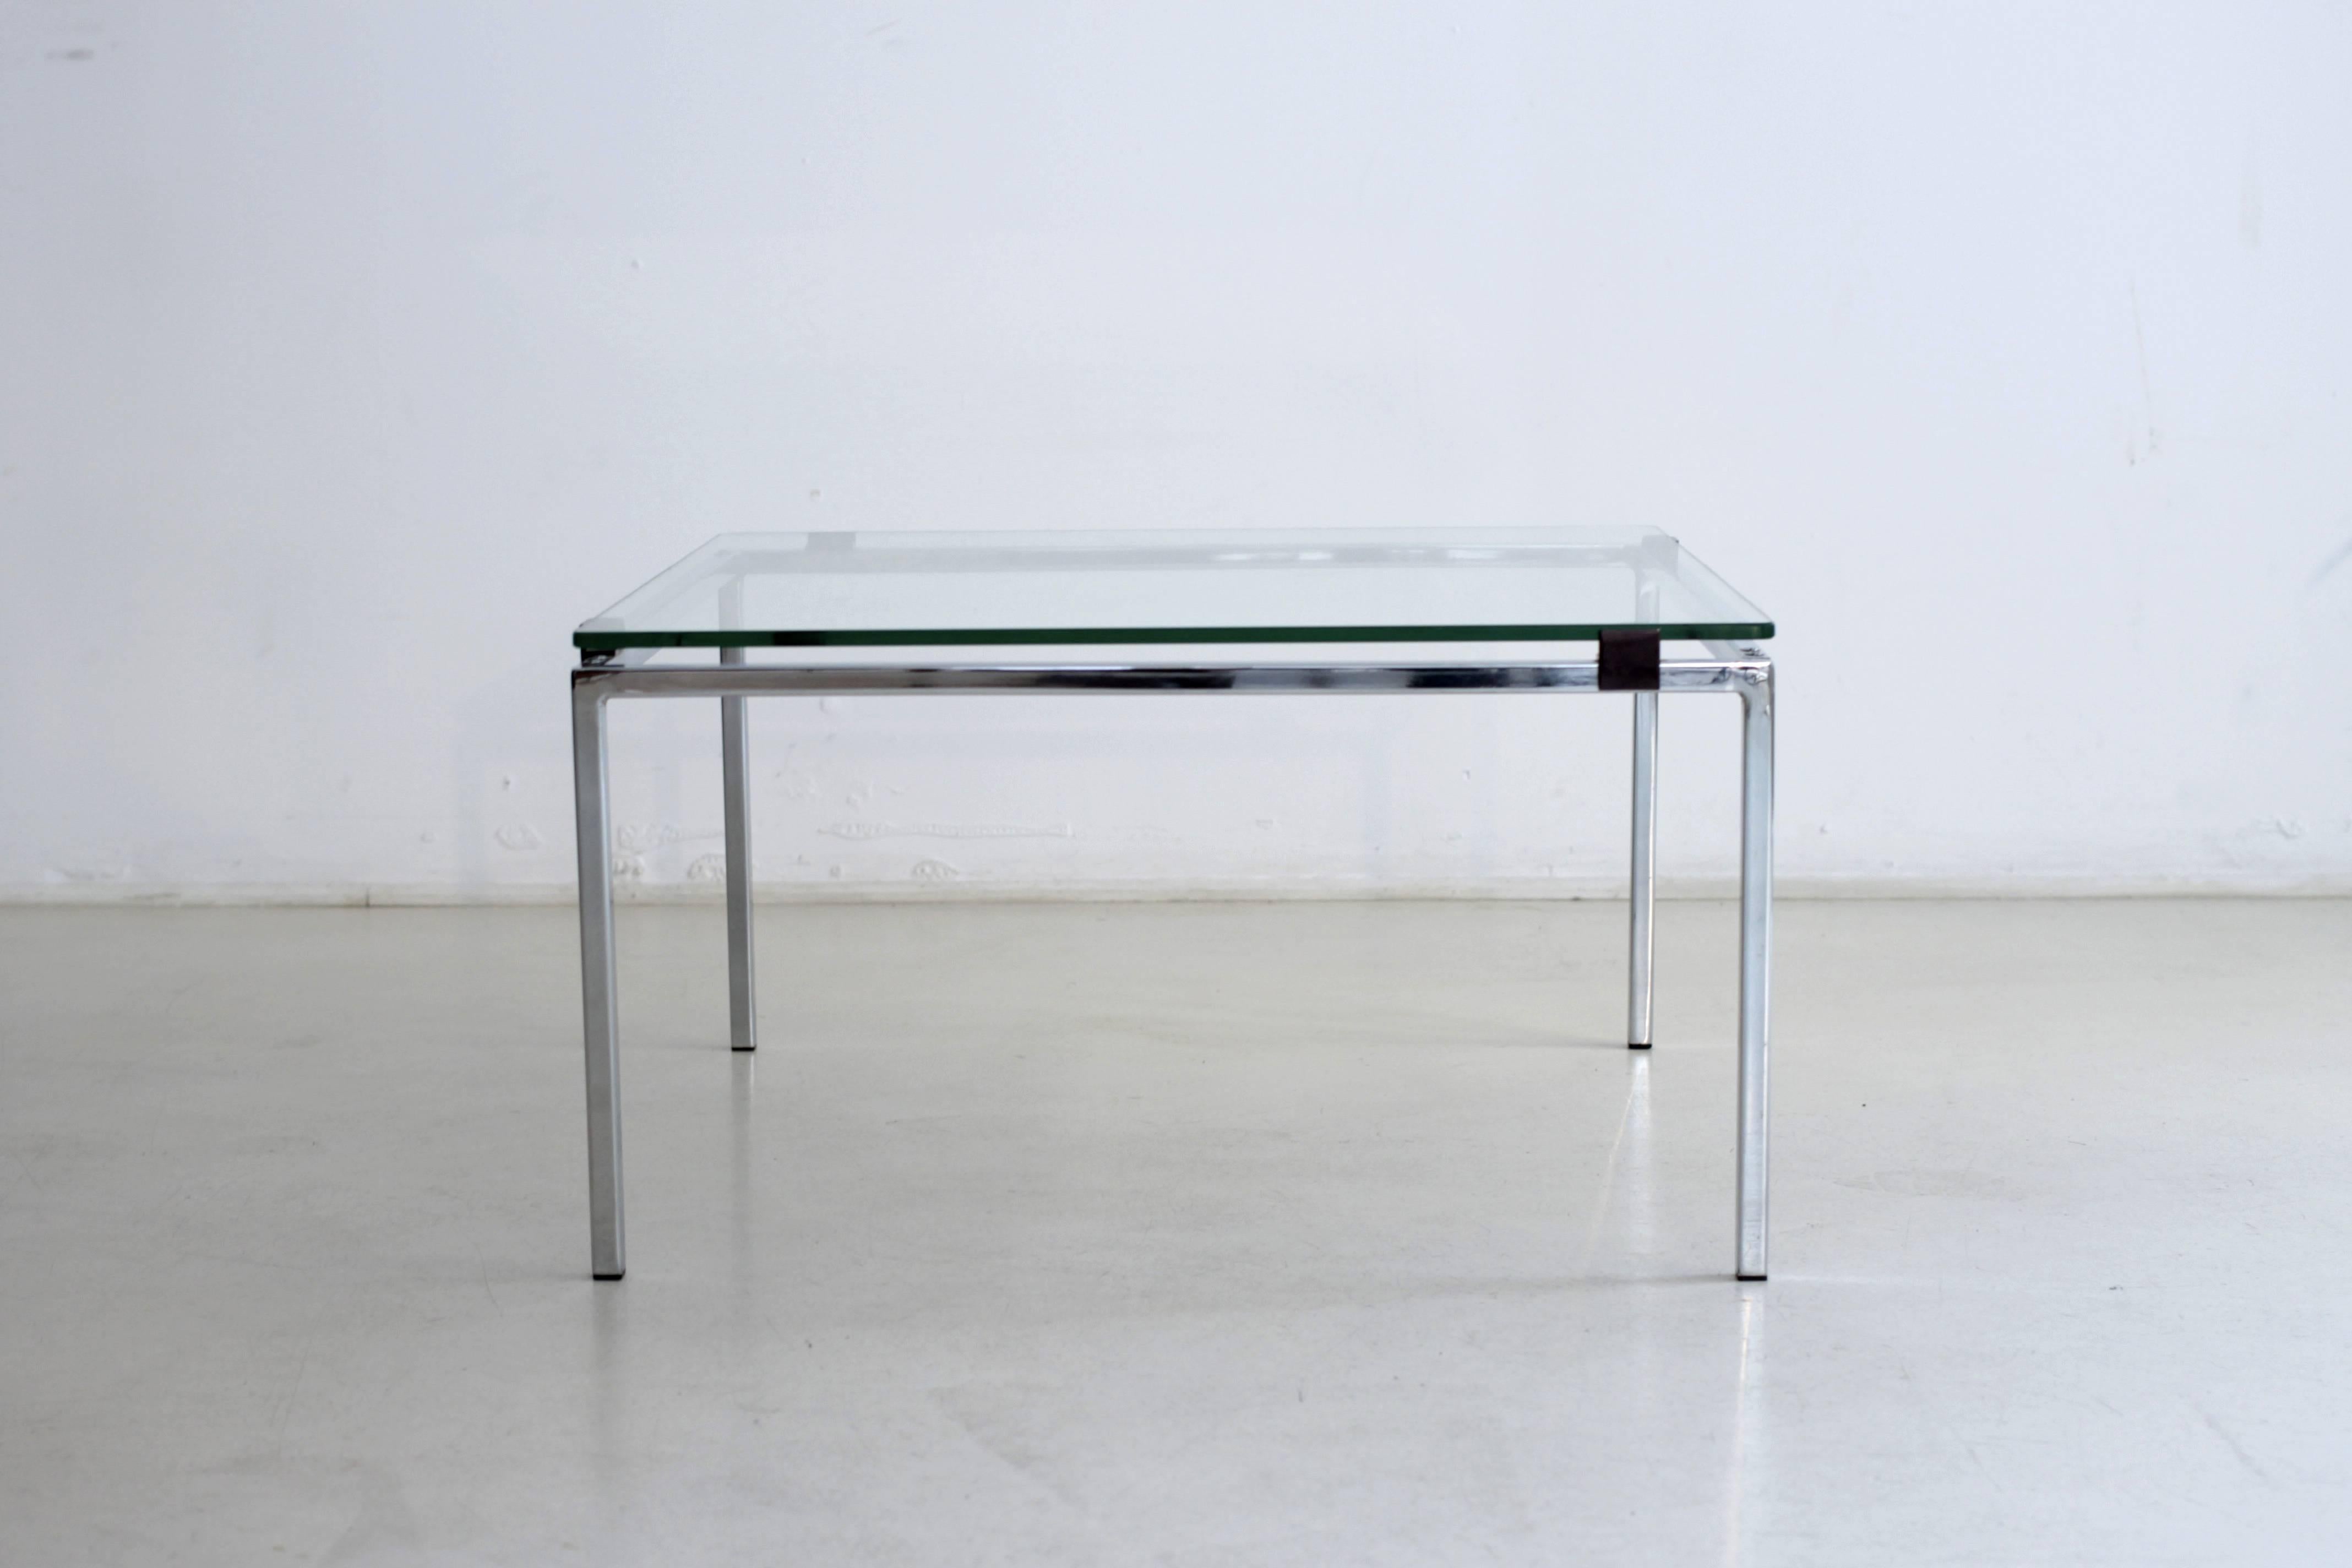 Minimalist squared cocktail table, model 807, designed by Alain Richard and manufactured by Meubles TV in France during the 1950s.